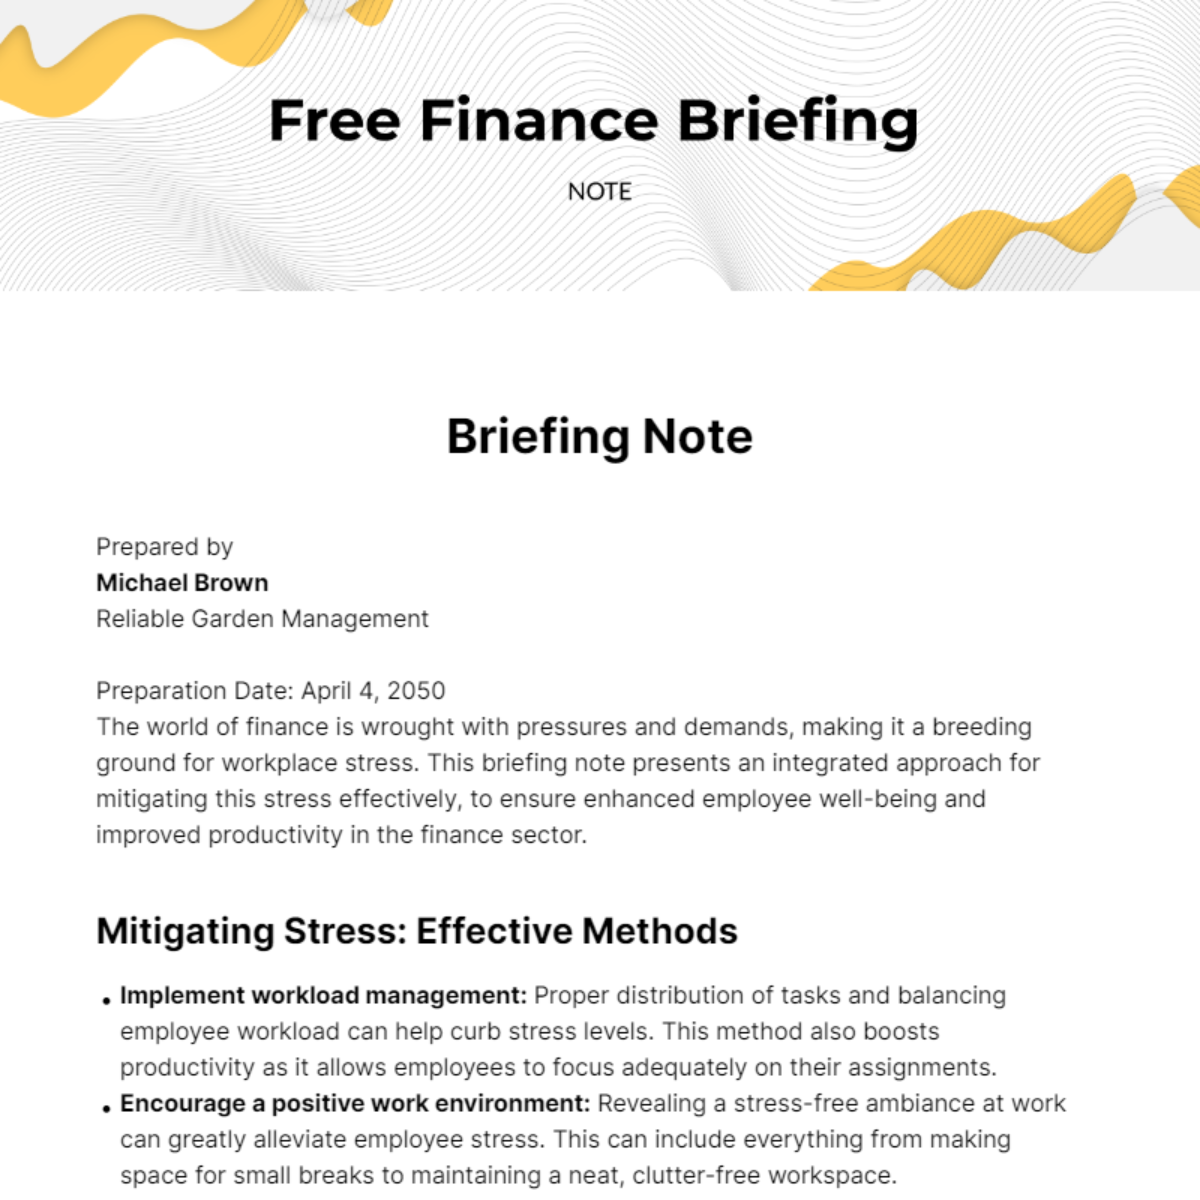 Free Finance Briefing Note Template